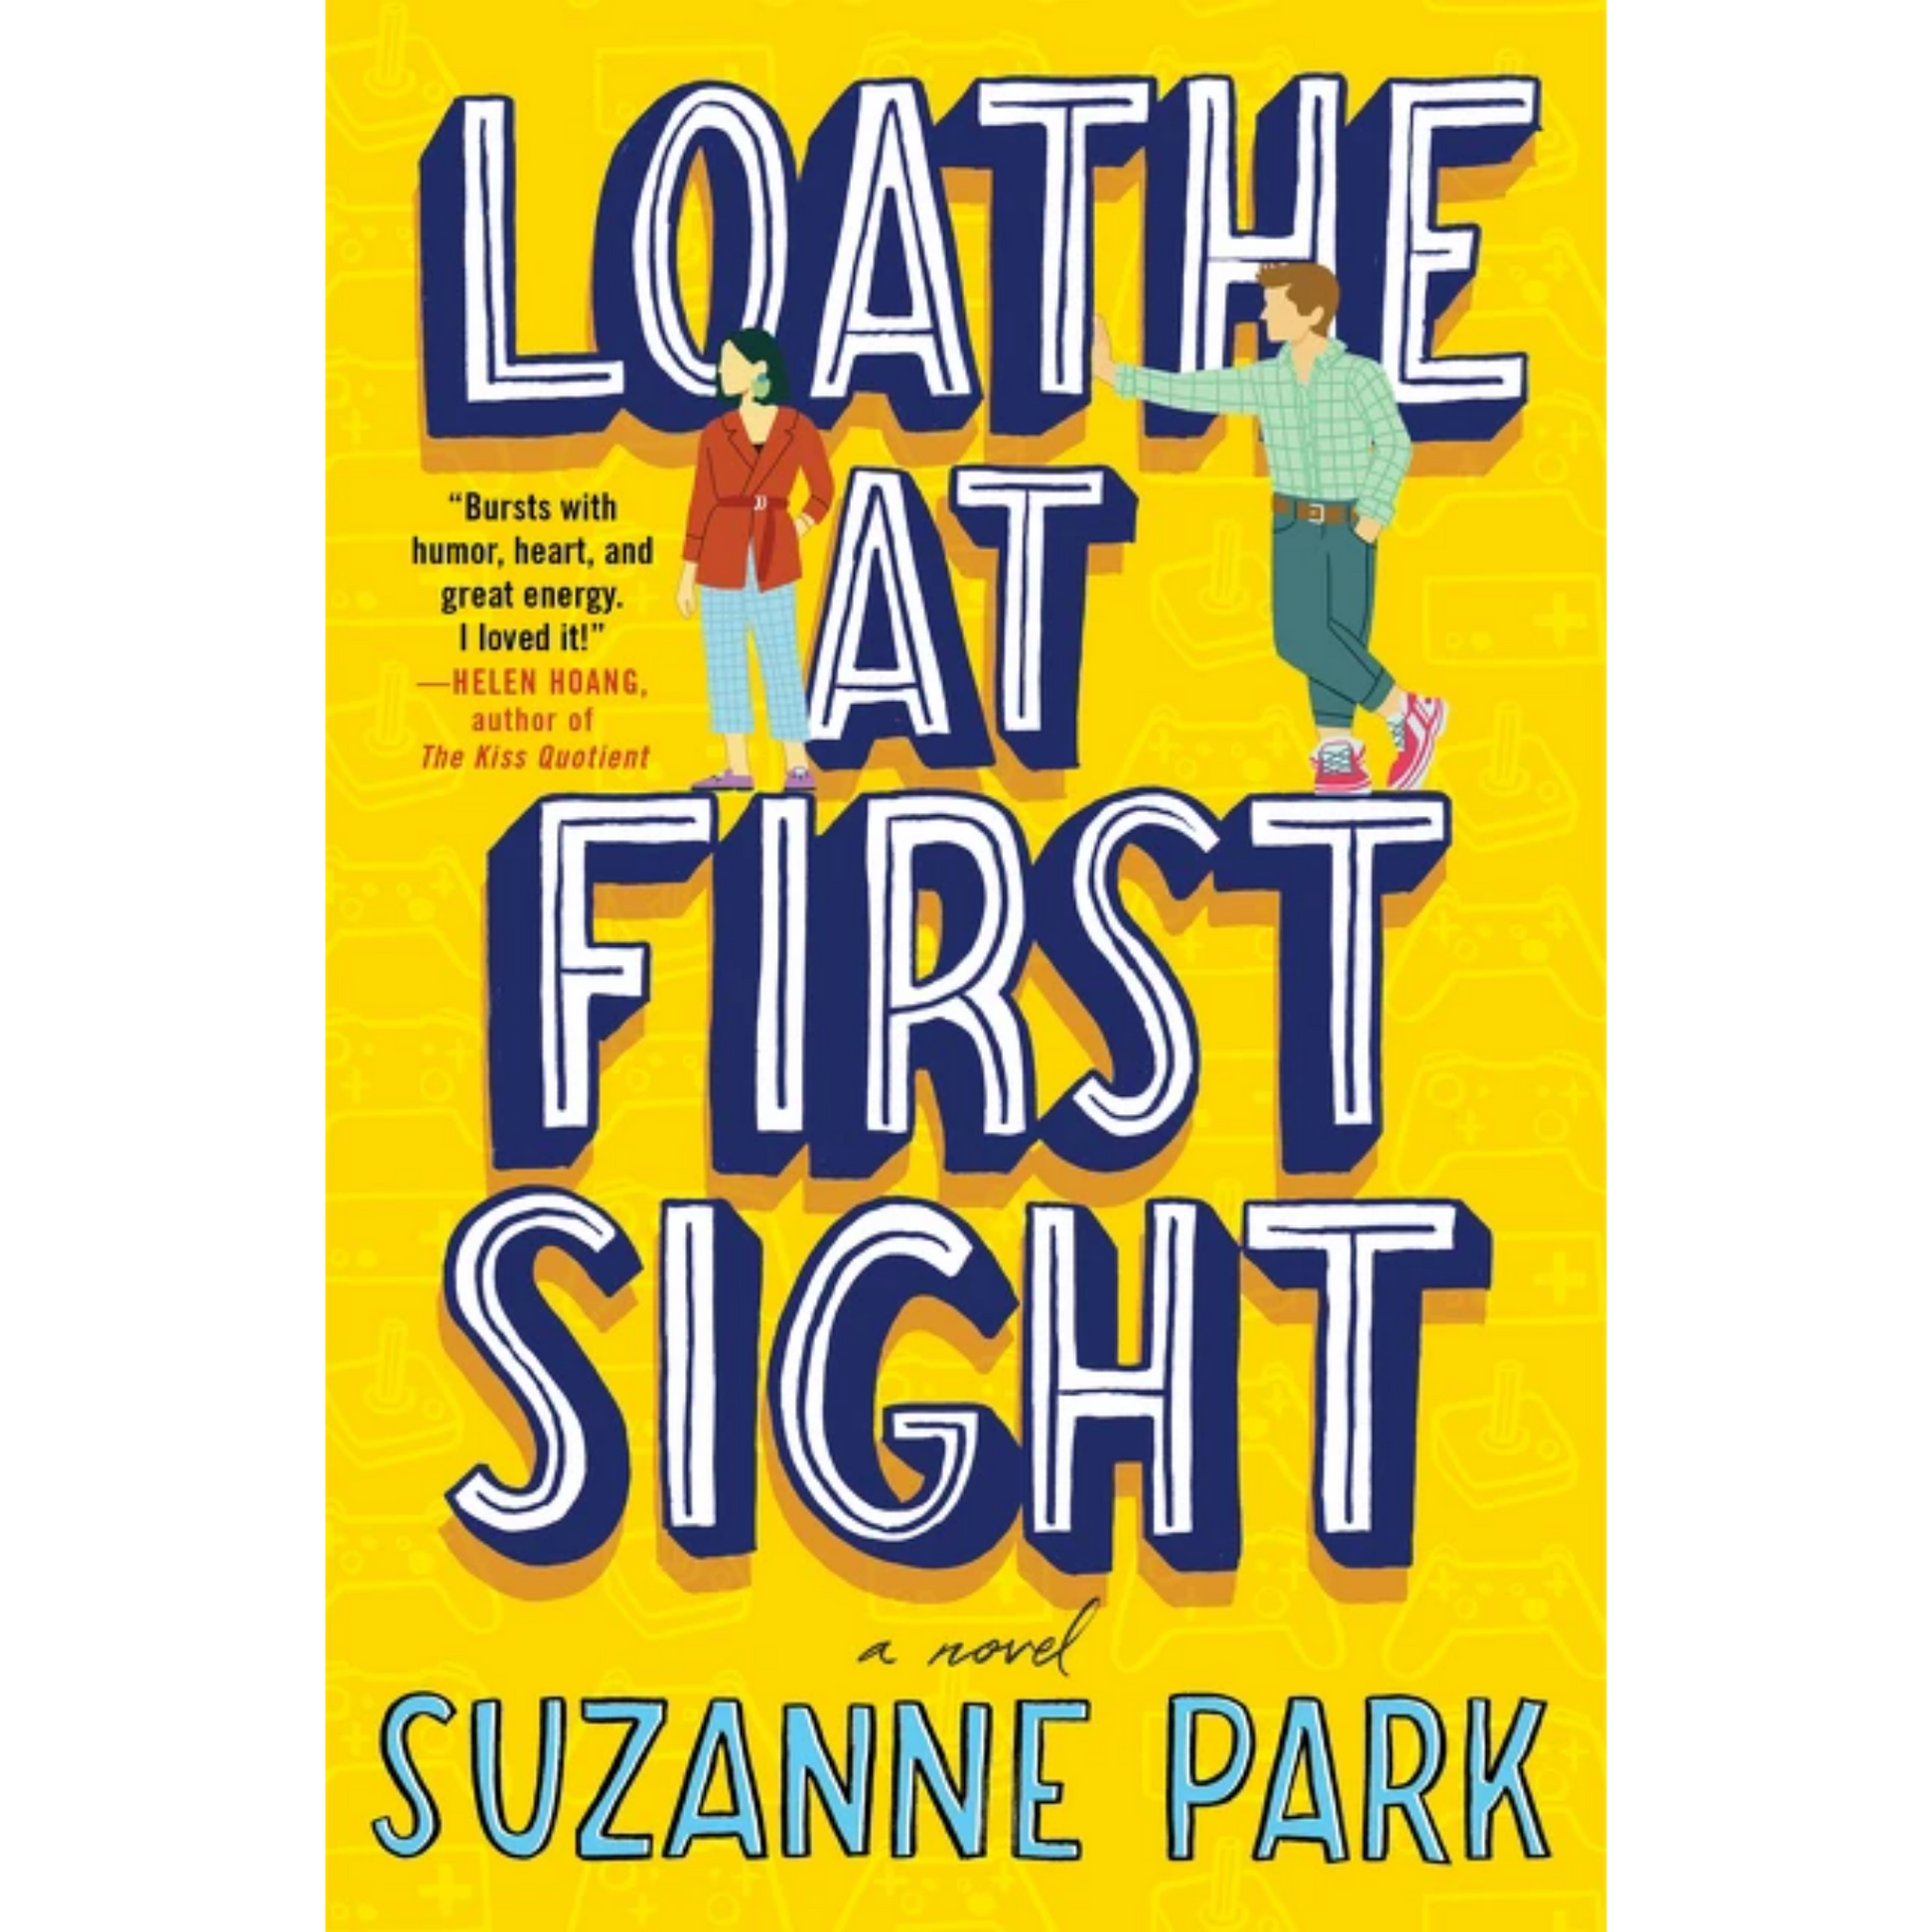 loathe at first sight suzanne park